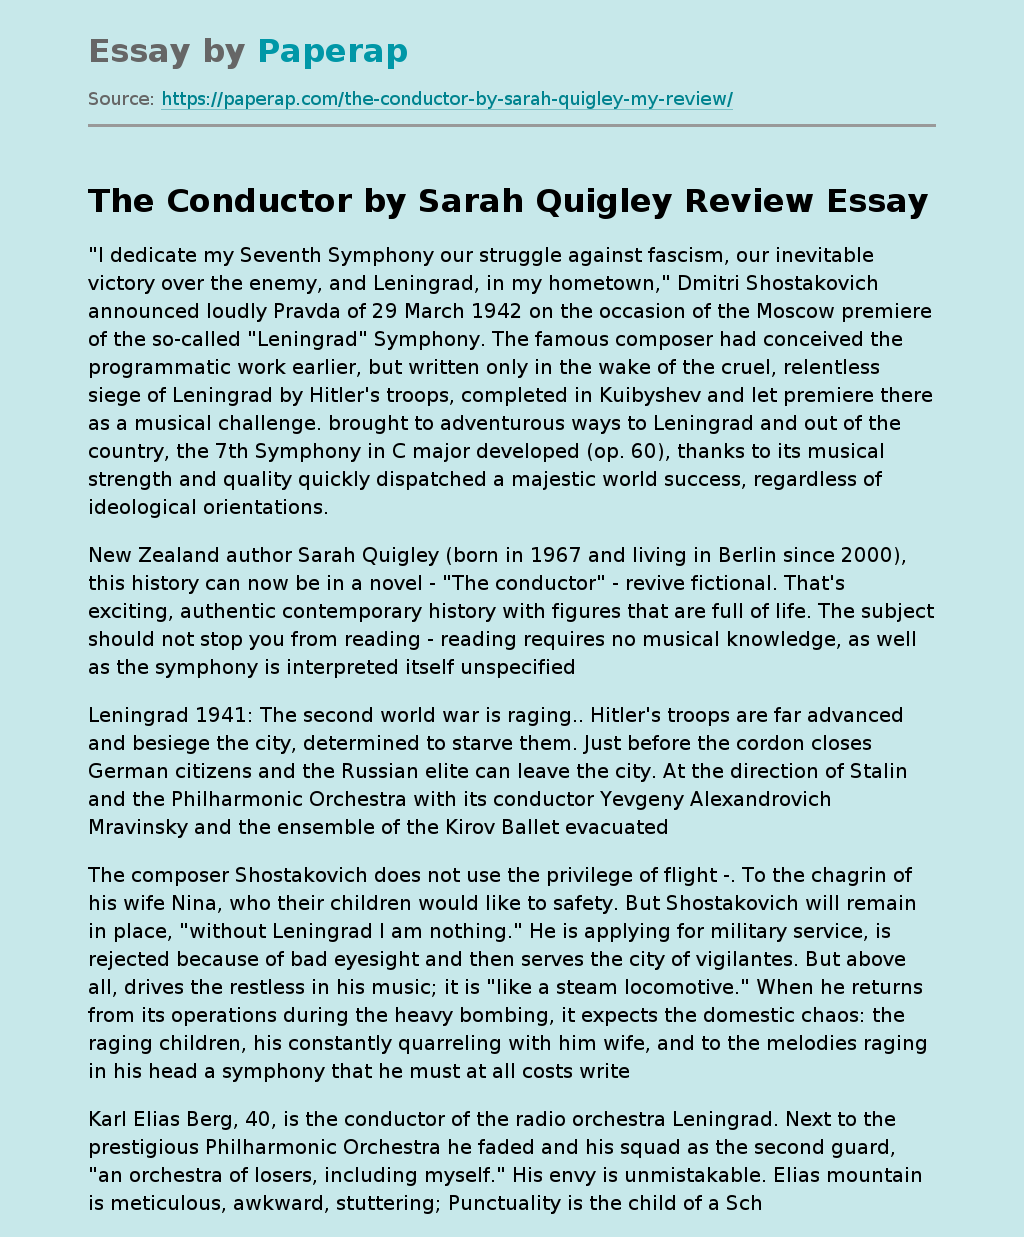 The Conductor by Sarah Quigley Review